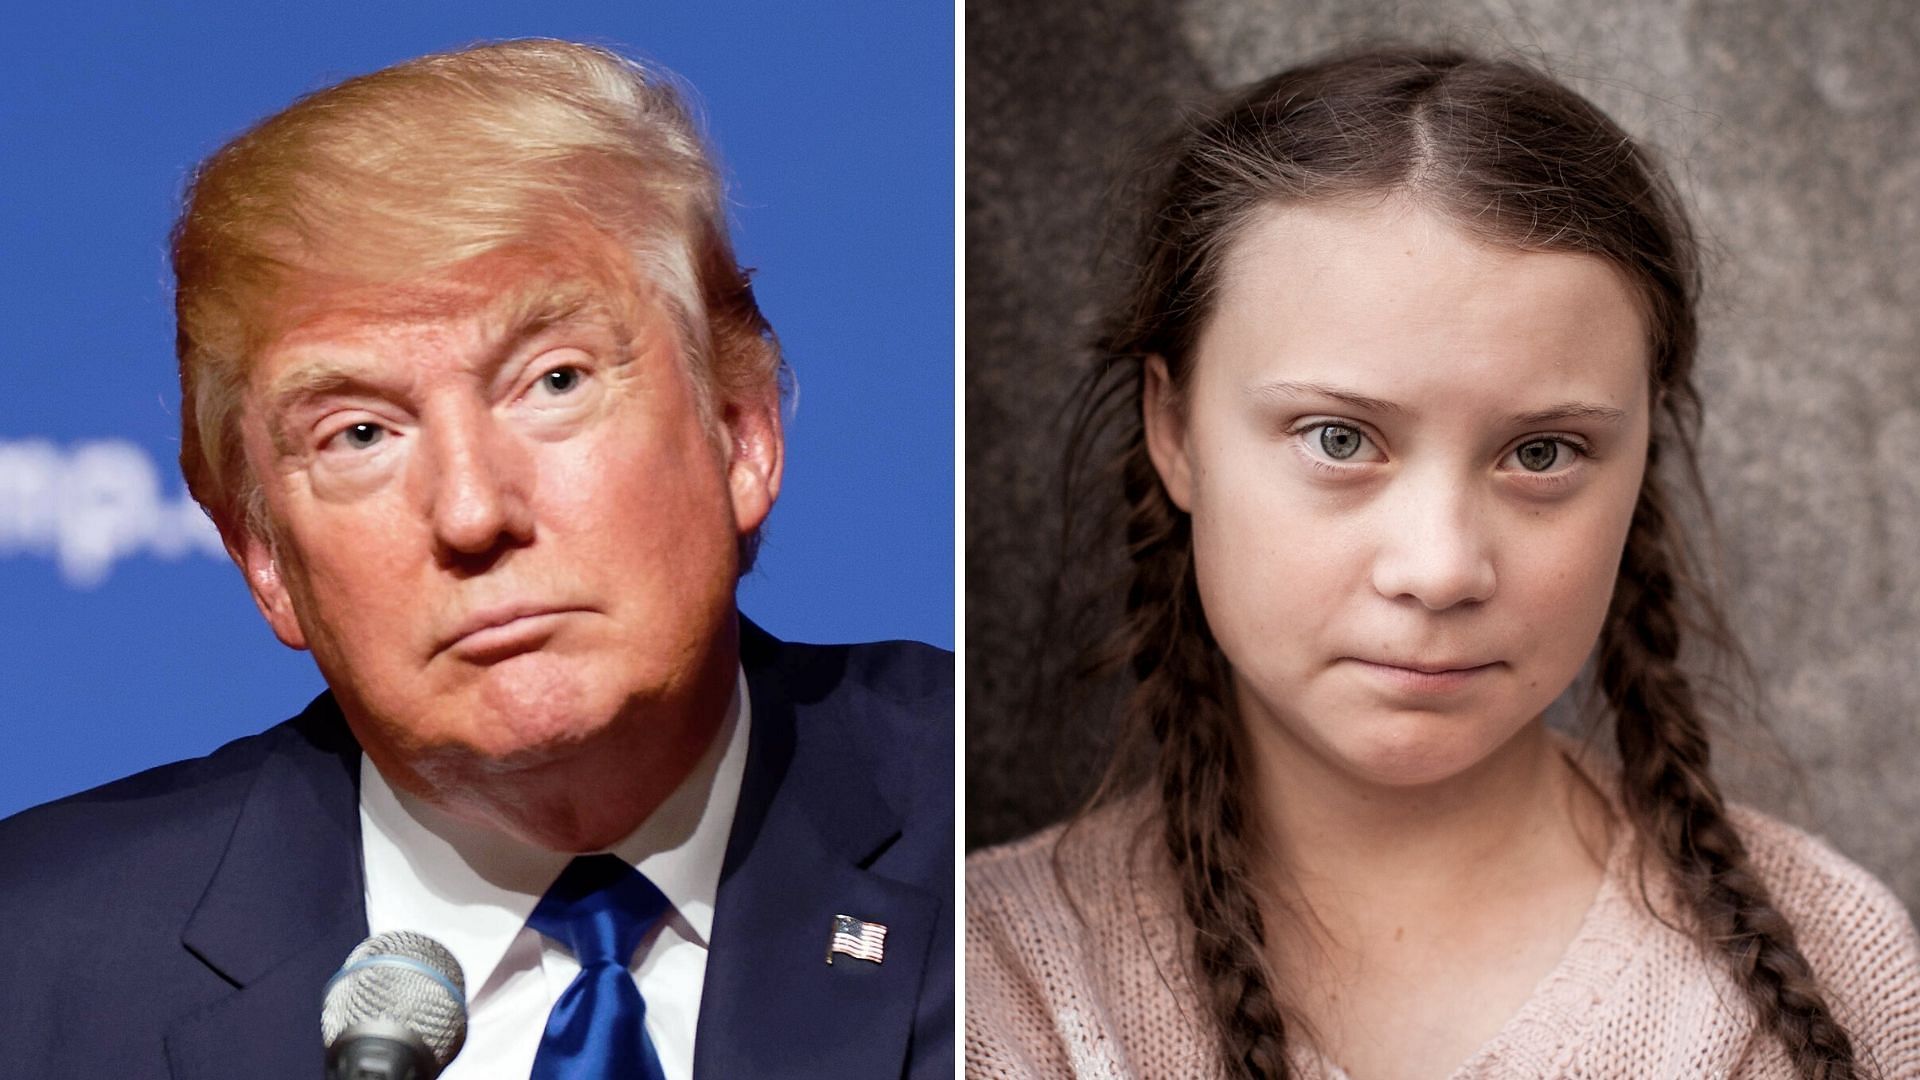 17-year-old climate activist Greta Thunberg retorts to Donald Trump’s jibe against her.&nbsp;